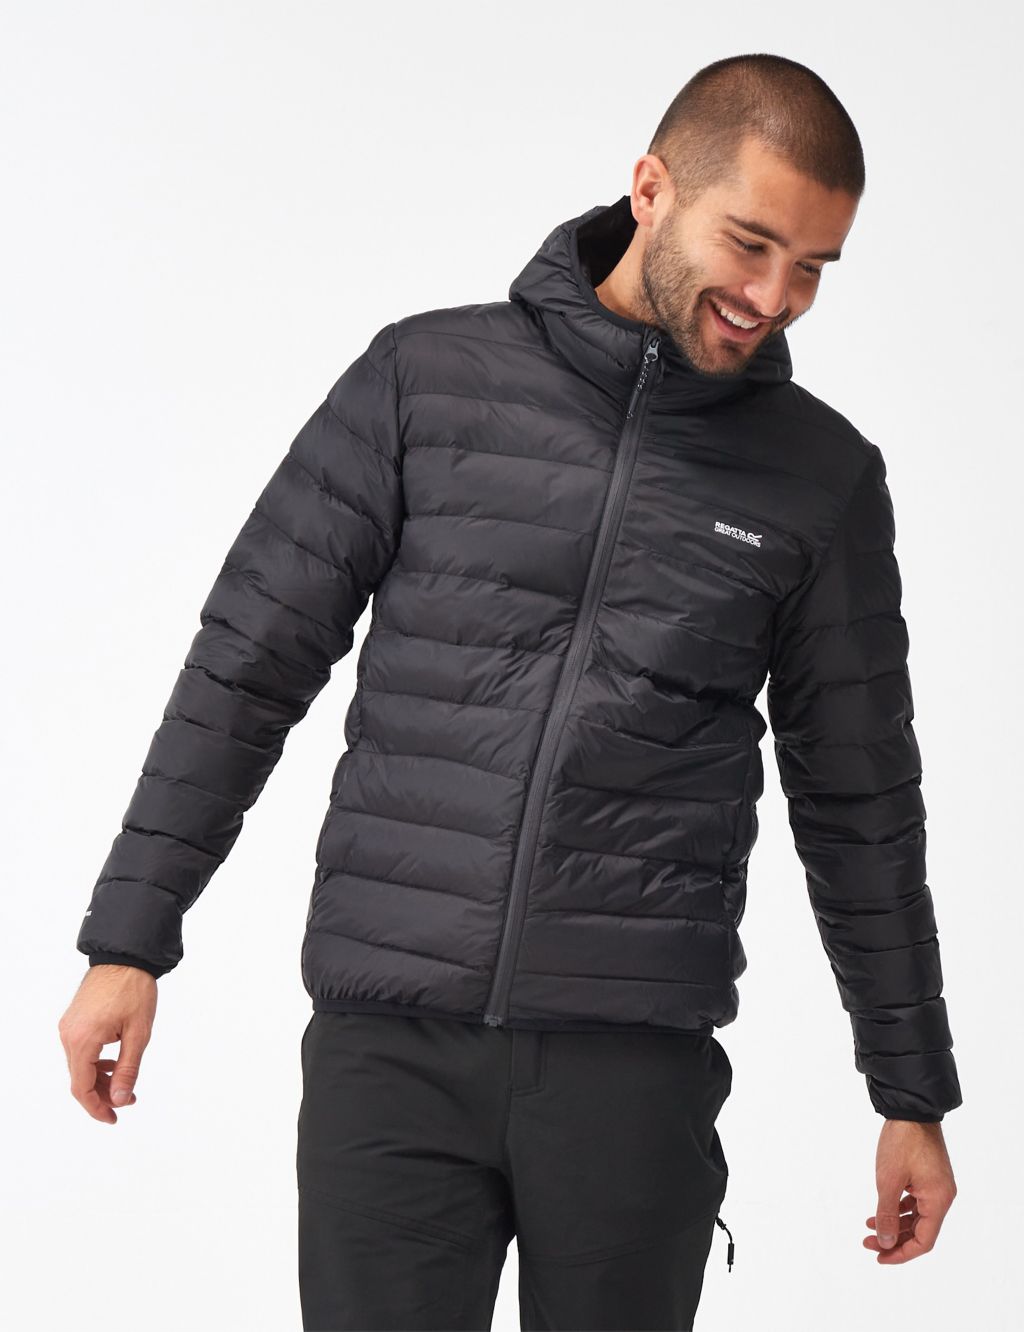 Marizion Water-Repellent Puffer Jacket image 1